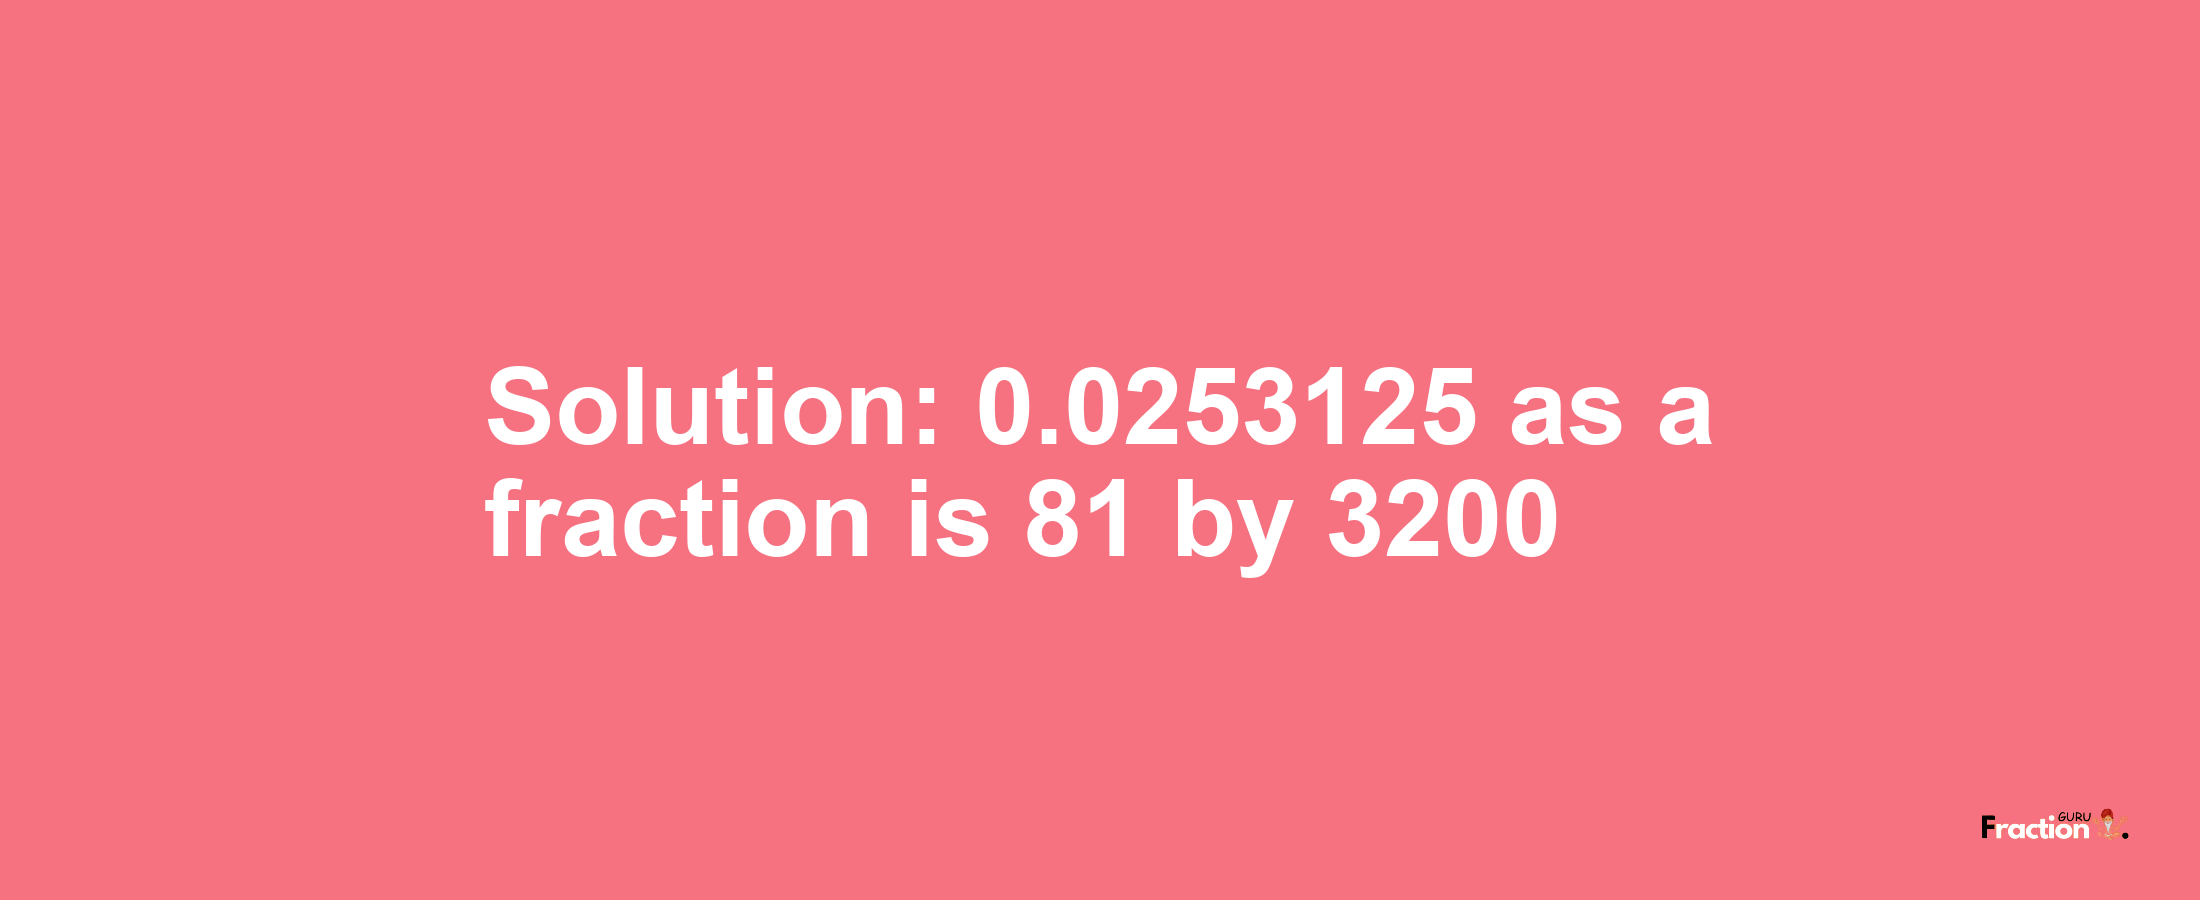 Solution:0.0253125 as a fraction is 81/3200